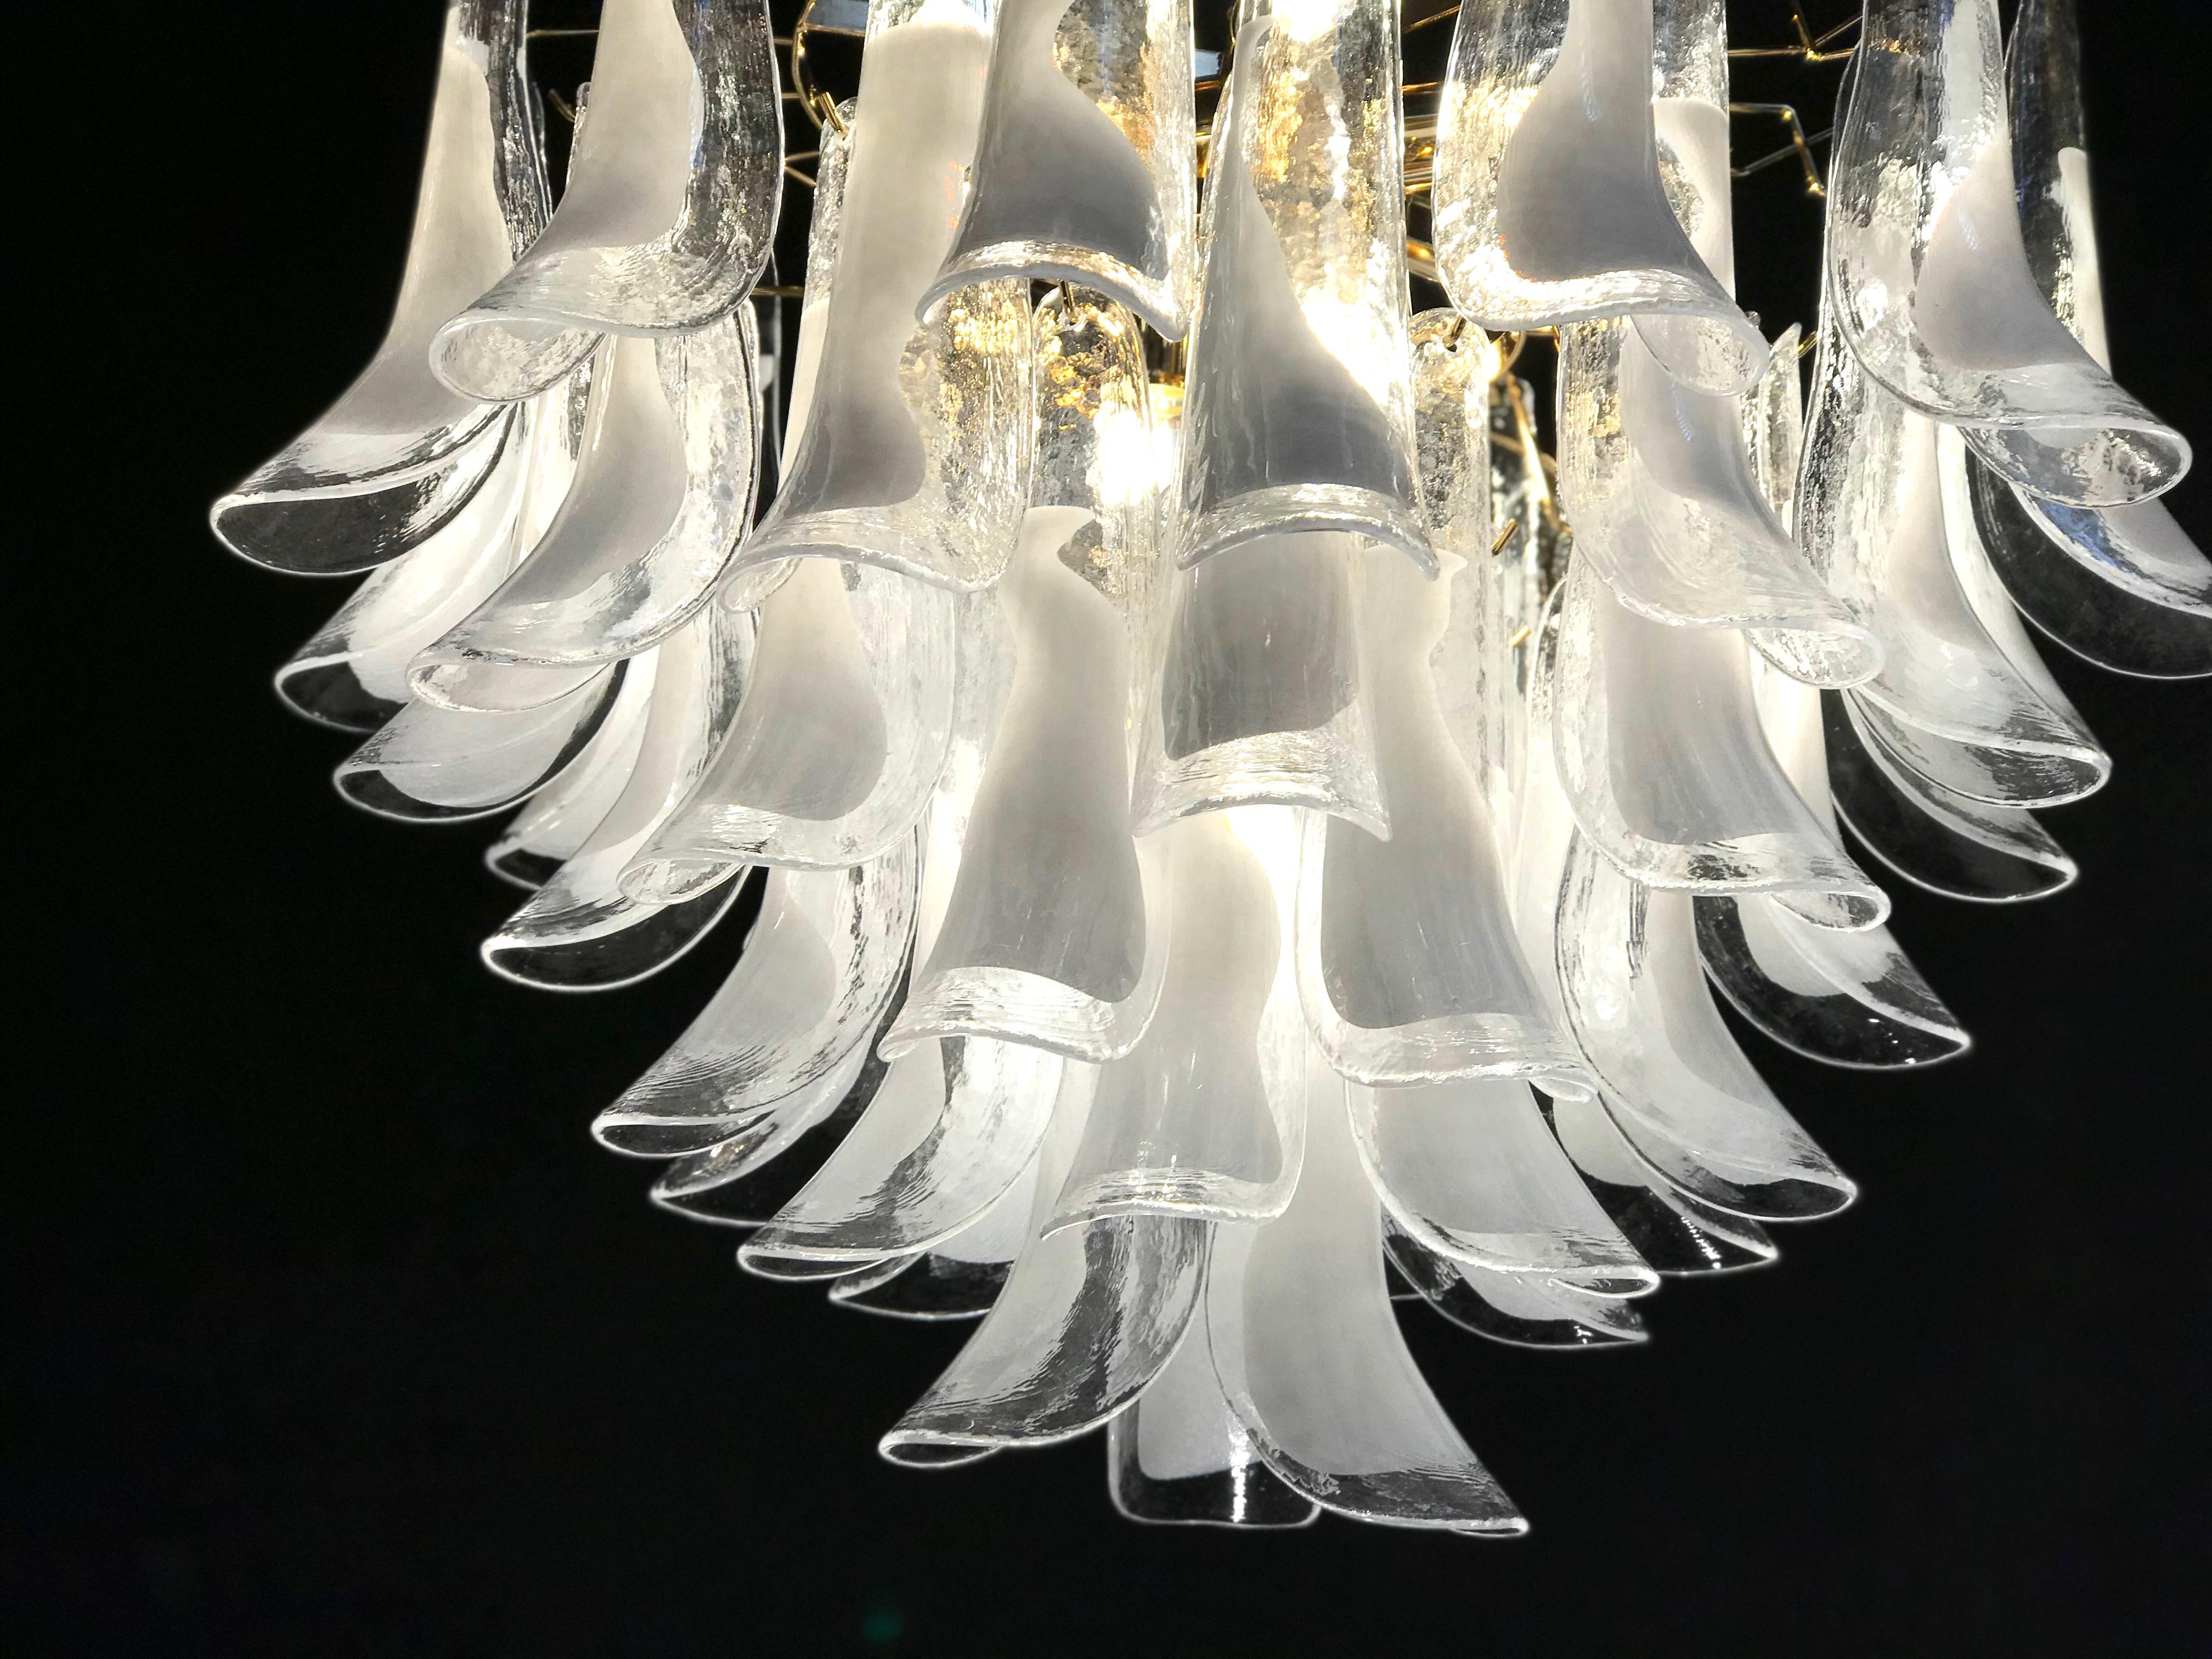 Contemporary Large White Tulip Petals Murano Chandelier or Ceiling Light For Sale